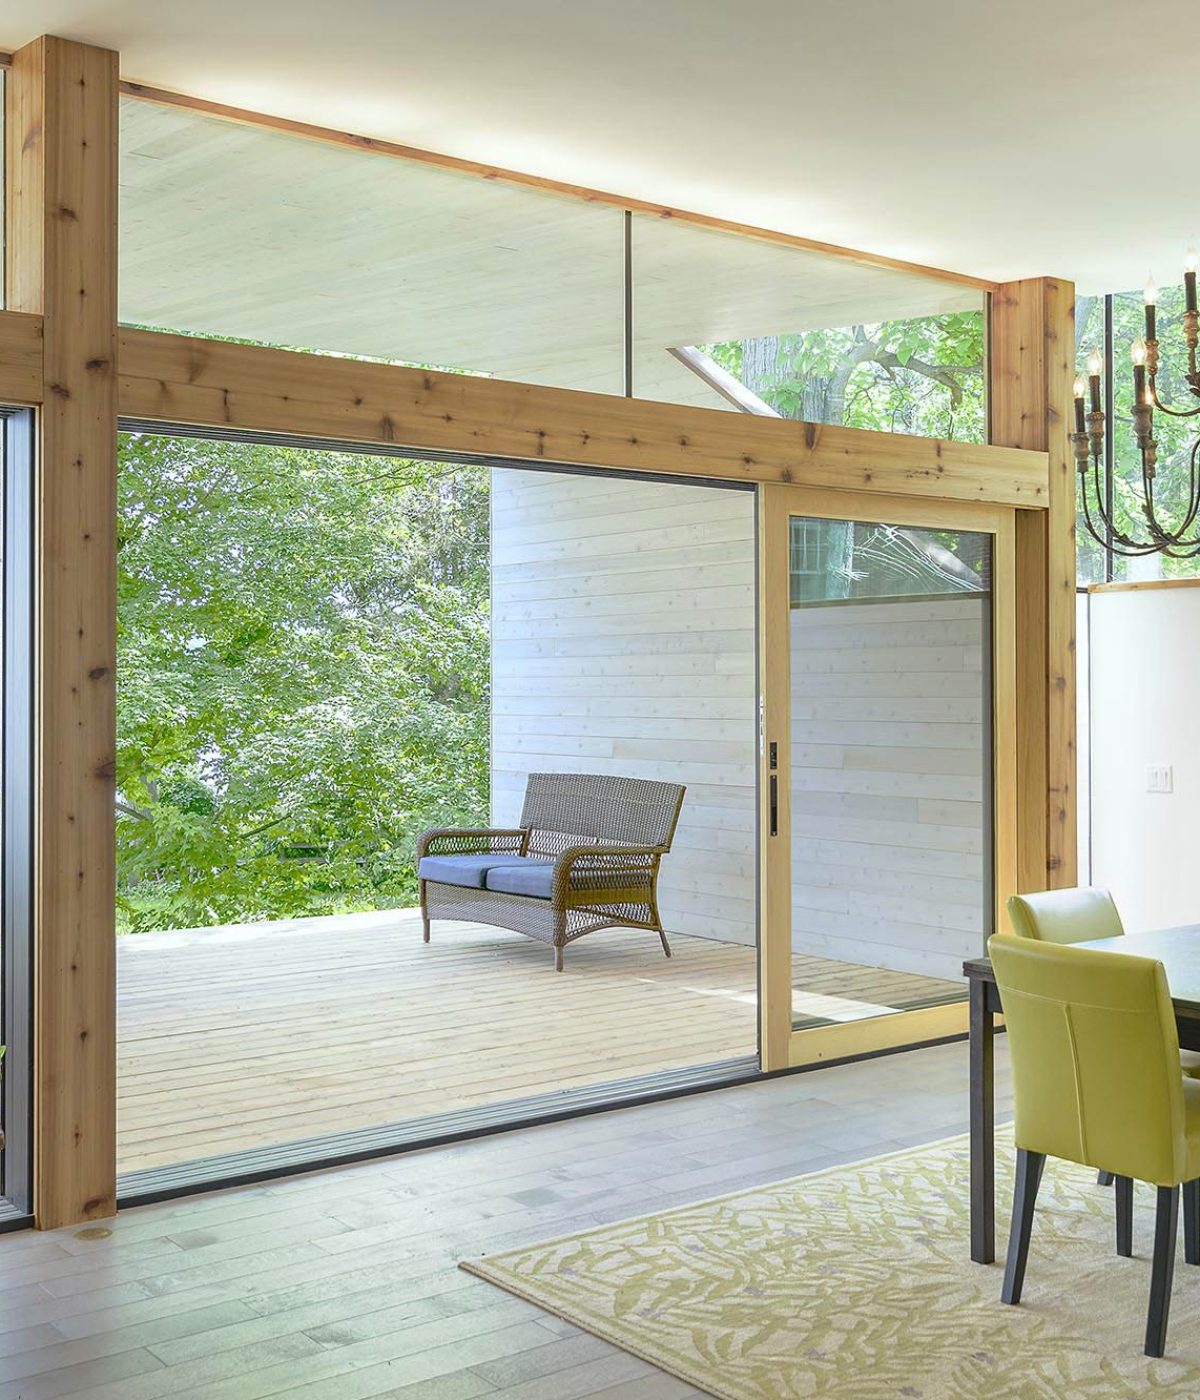 The large, wooden multi-slide door accentuates the natural touches in this home.